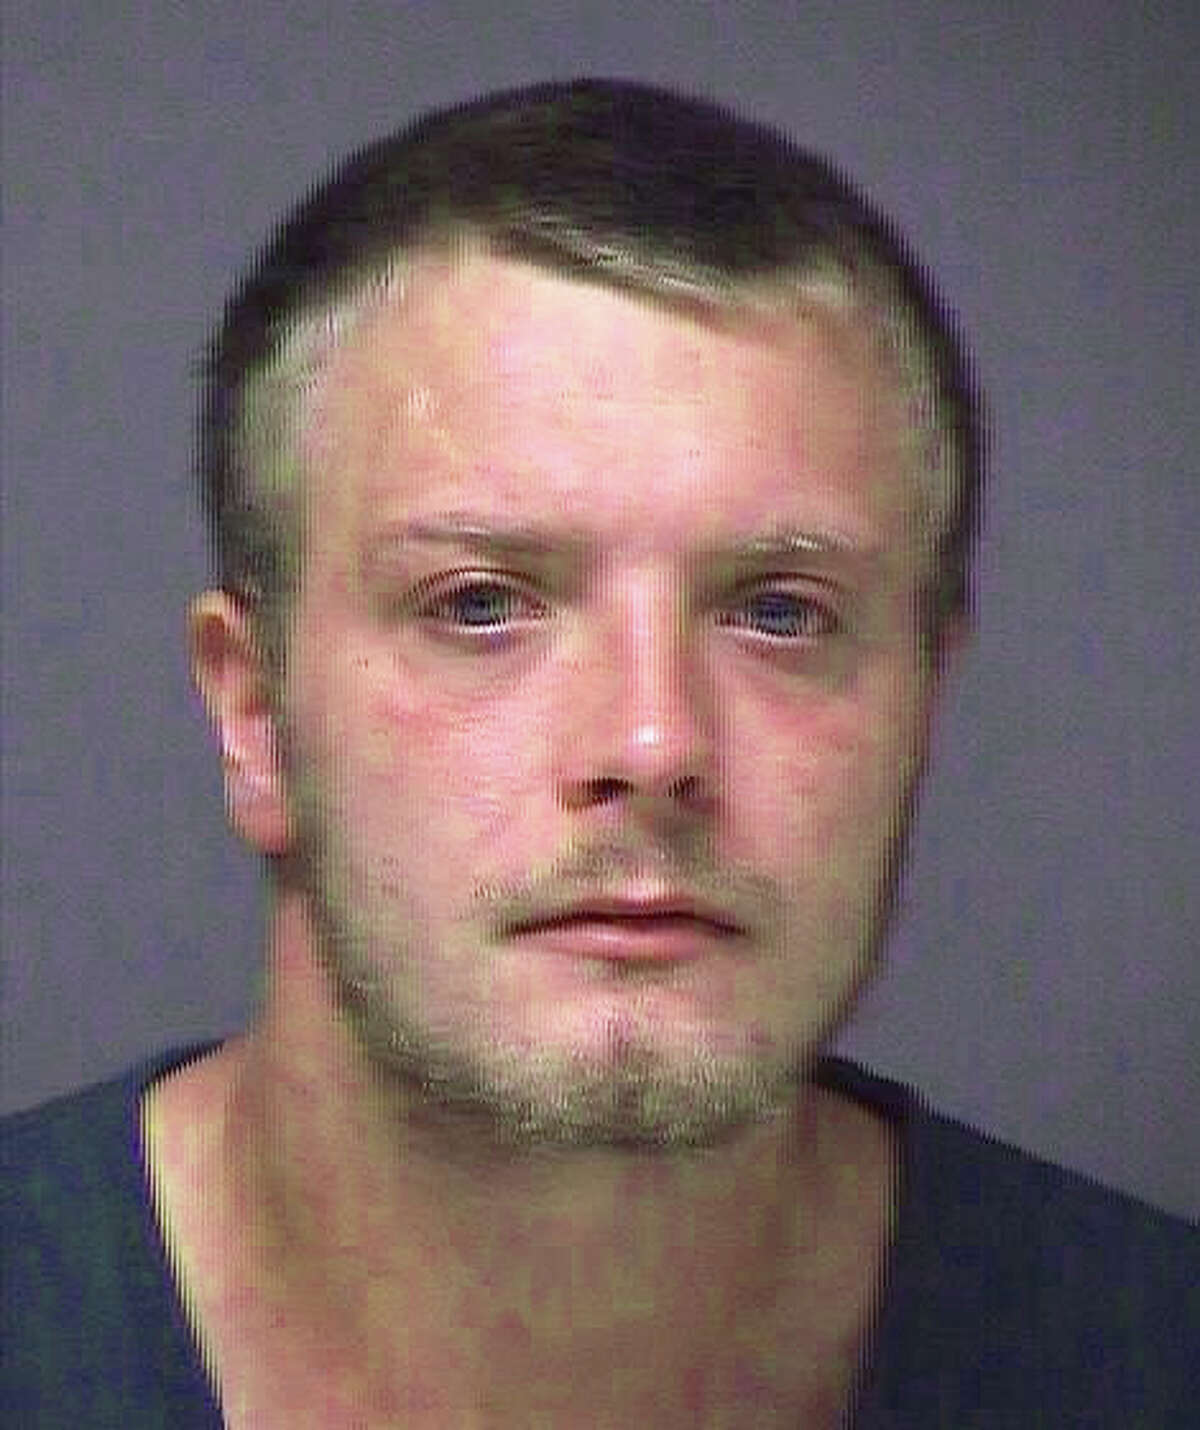 This photo provided by Ocean County Prosecutor's Office shows Steven Sheerer. Sheerer, the owner of the home where Rosie OÂ?’DonnellÂ?’s missing teen daughter was found earlier this week has been arrested for allegedly having inappropriate online communications with the 17-year-old girl, authorities announced Saturday, Aug. 22, 2015. He faces charges of child endangerment and distribution of obscenity to a minor. (Ocean County Prosecutor's Office via AP)